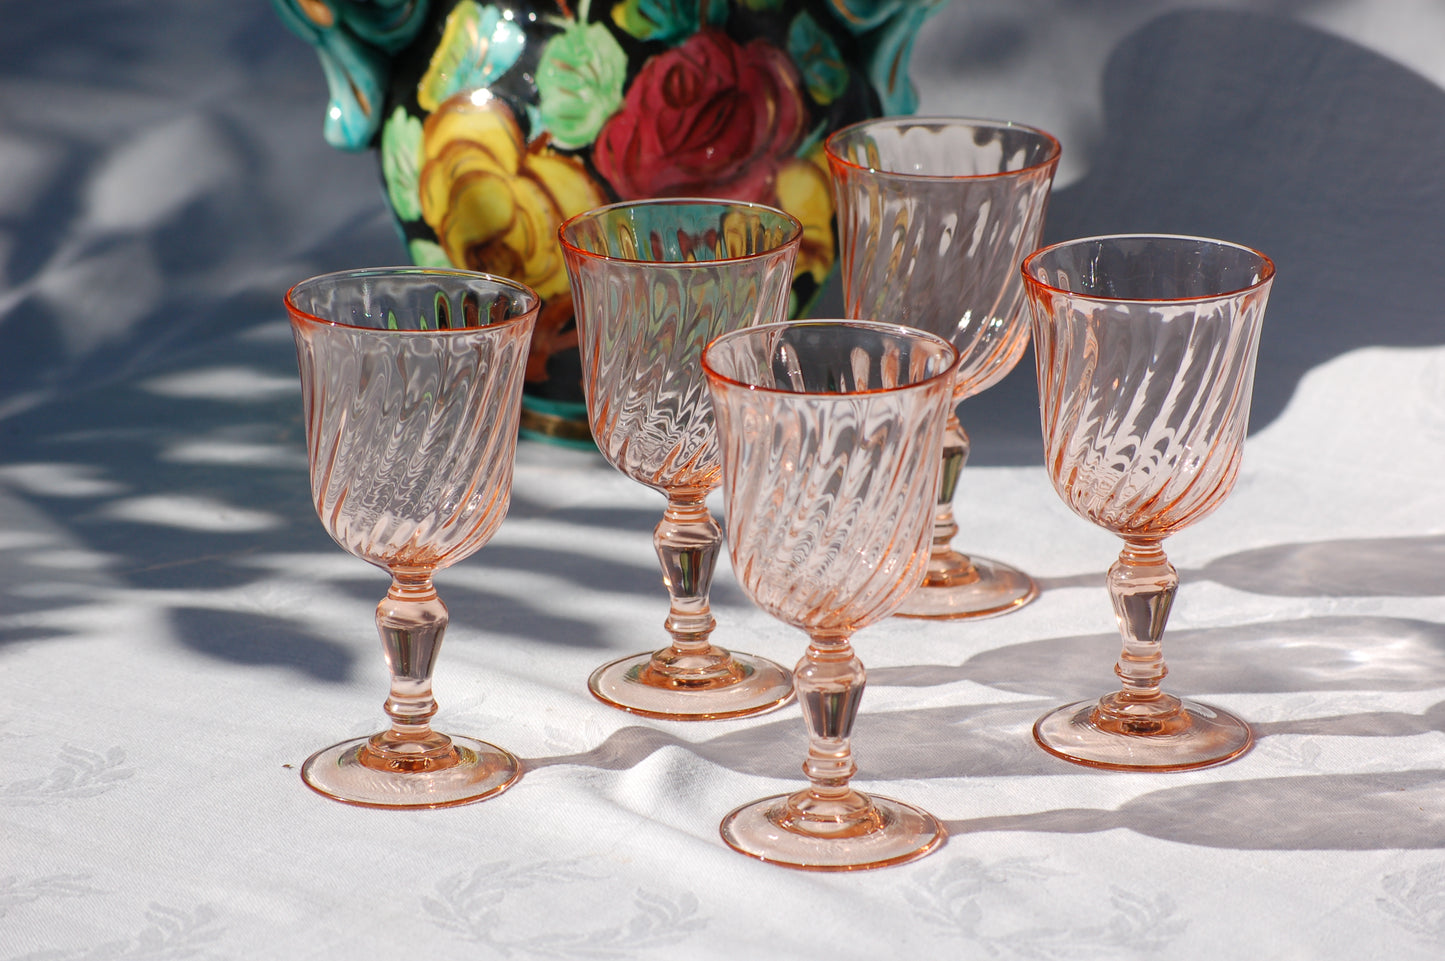 Set of 5 French vintage rosaline swirl wine  glasses  Luminarcfrom the seventies by Mediterrastyle. Set of 5 French vintage rosaline swirl wine glasses from the seventies. Have your rose in seventies mood with these colorfull and elegant glasses in a light rose color. French rosaline swirl wine glasses. Set of 5 glasses from Arcoroc Luminarc, France. ©MediterraStyle